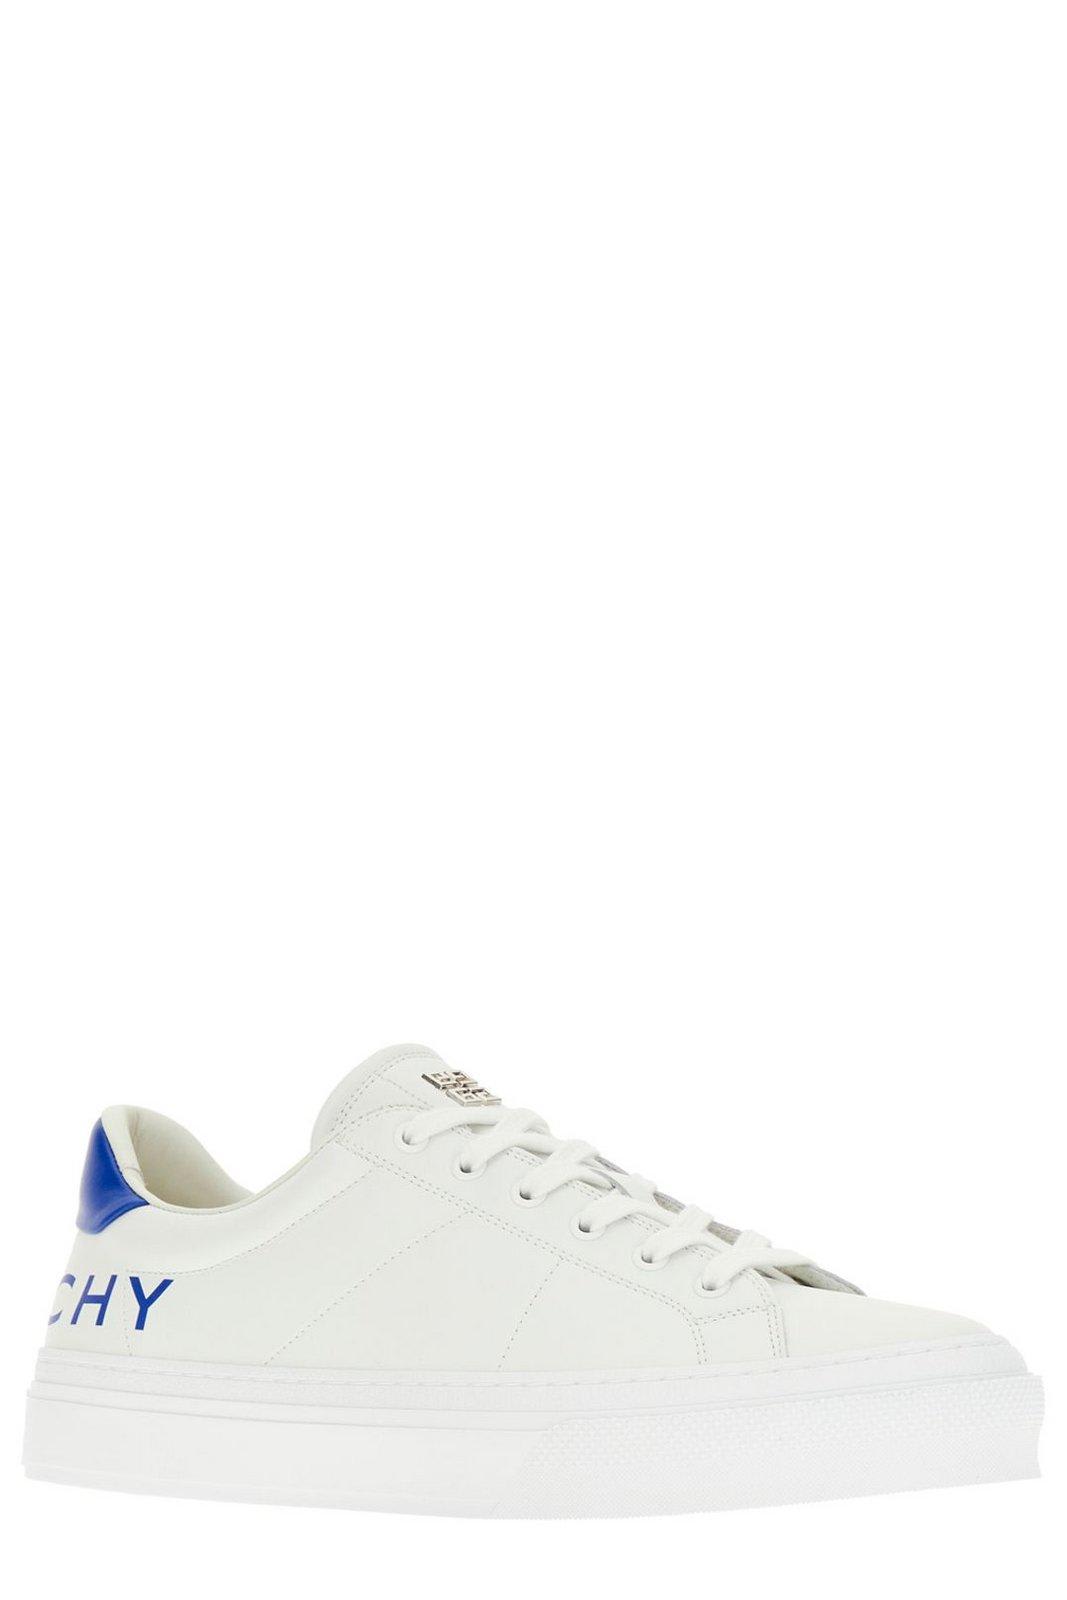 Shop Givenchy Logo Printed Low-top Sneakers In White